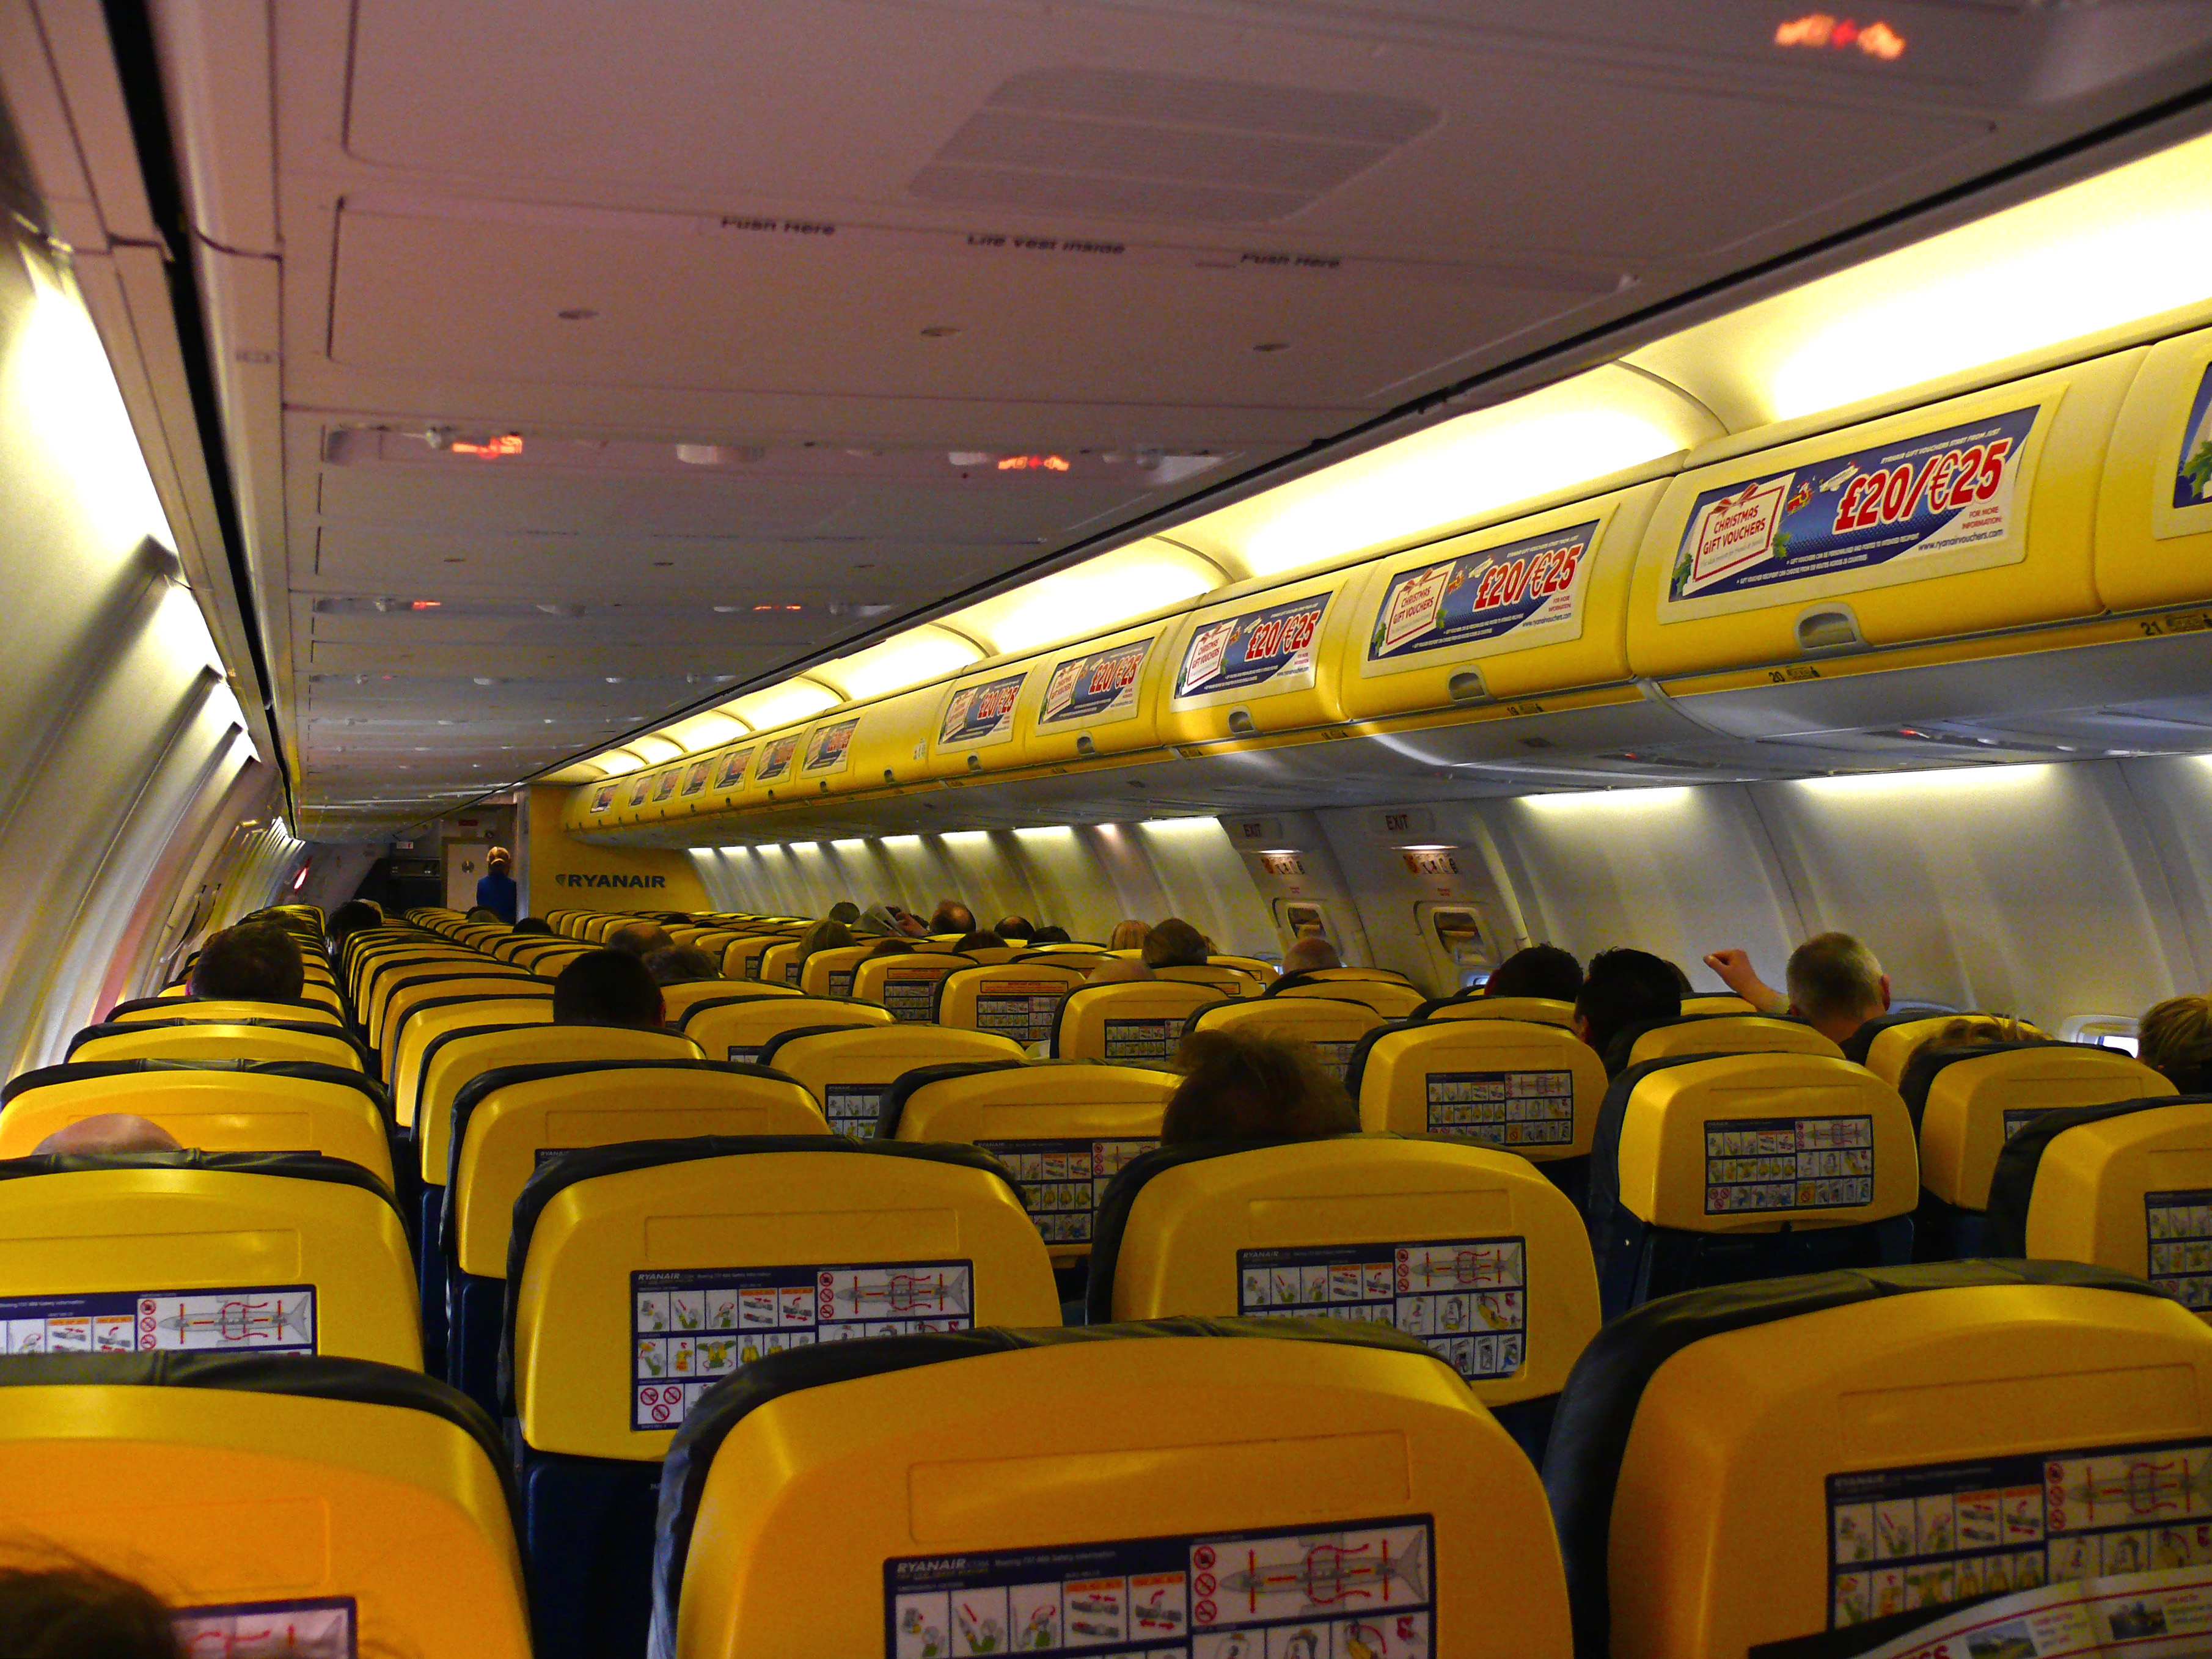 Ryanair's Boeing 737-800 Cabin. Photo by Ruthann, used with permission.